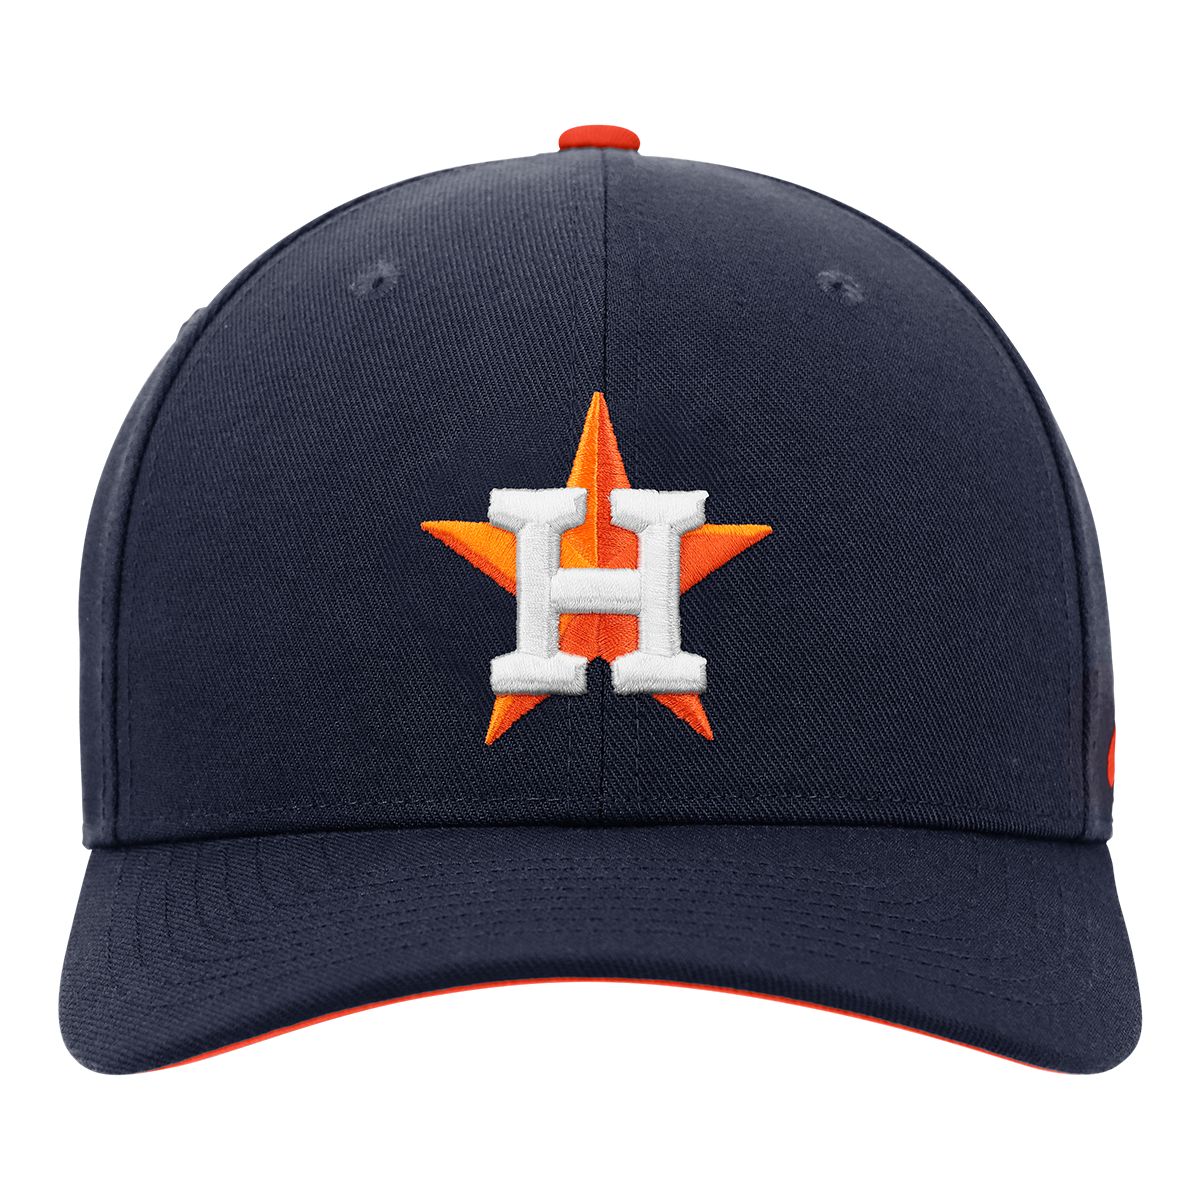 Houston Astros - Looking for these shirts + hats? We got